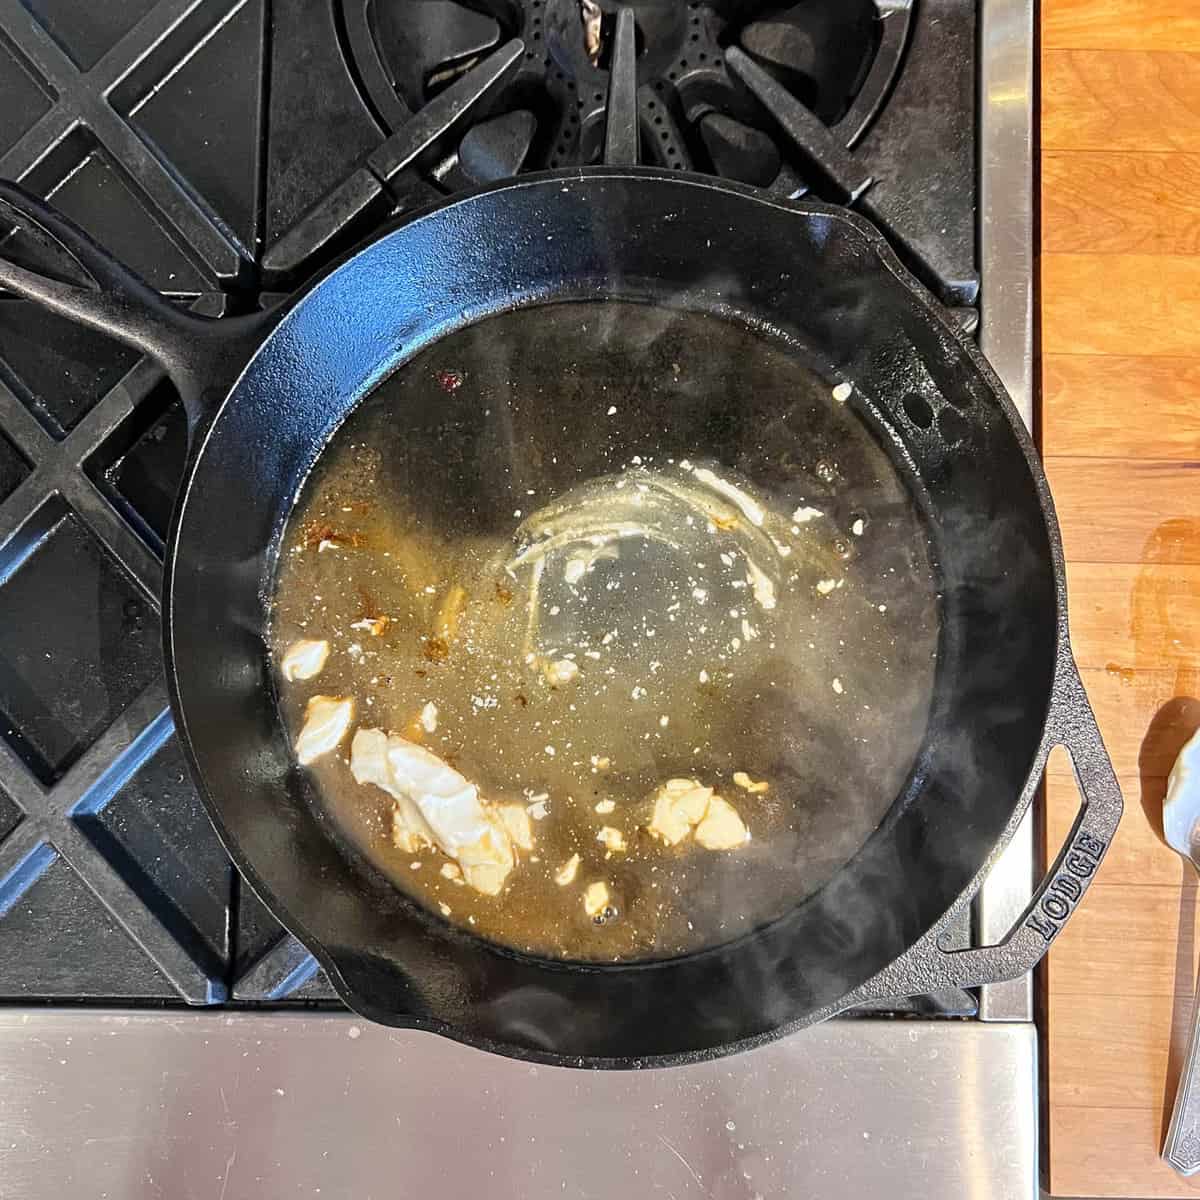 Sour cream sauce being prepared in cast iron pan.